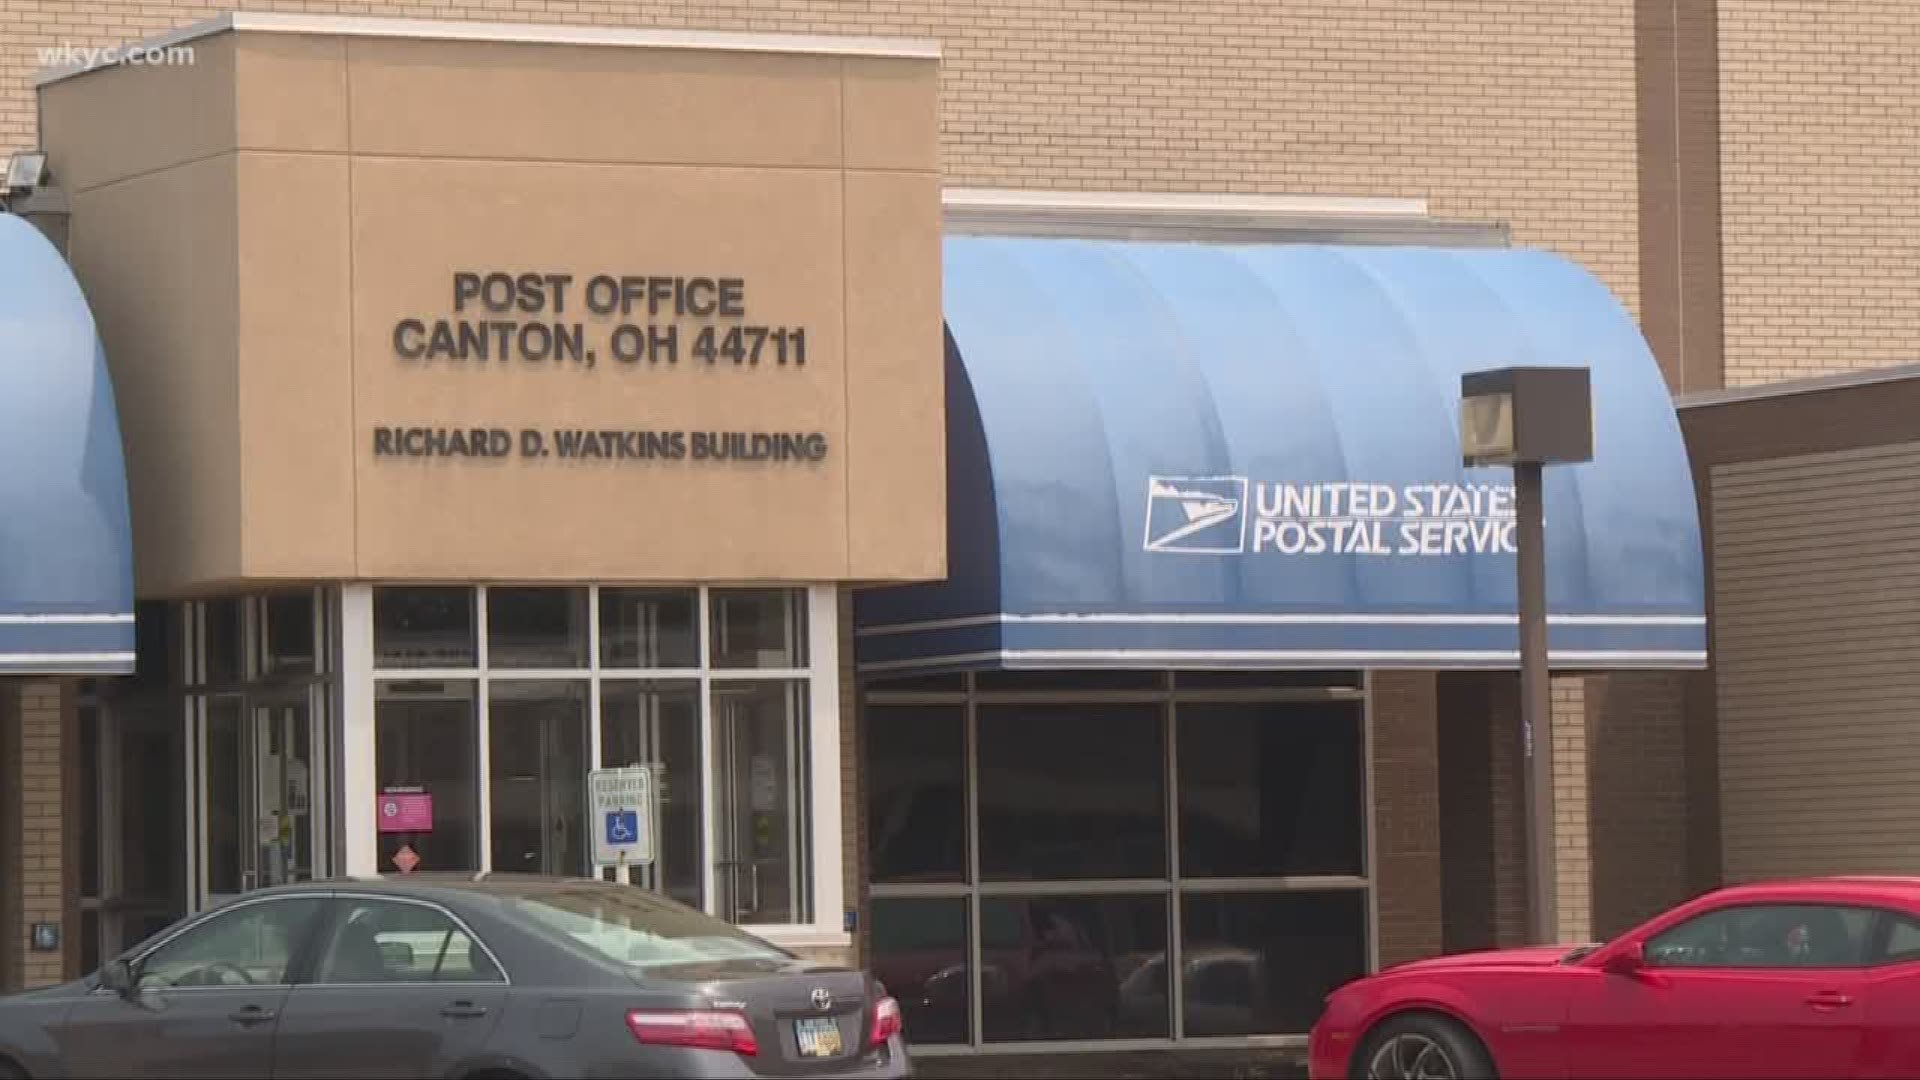 Police in Canton say three mail carriers reported suspicious activity on their routes — drawing attention to their safety. One mail carrier reported being watched by someone in a vehicle and another two said they were approached and asked to get into a car.